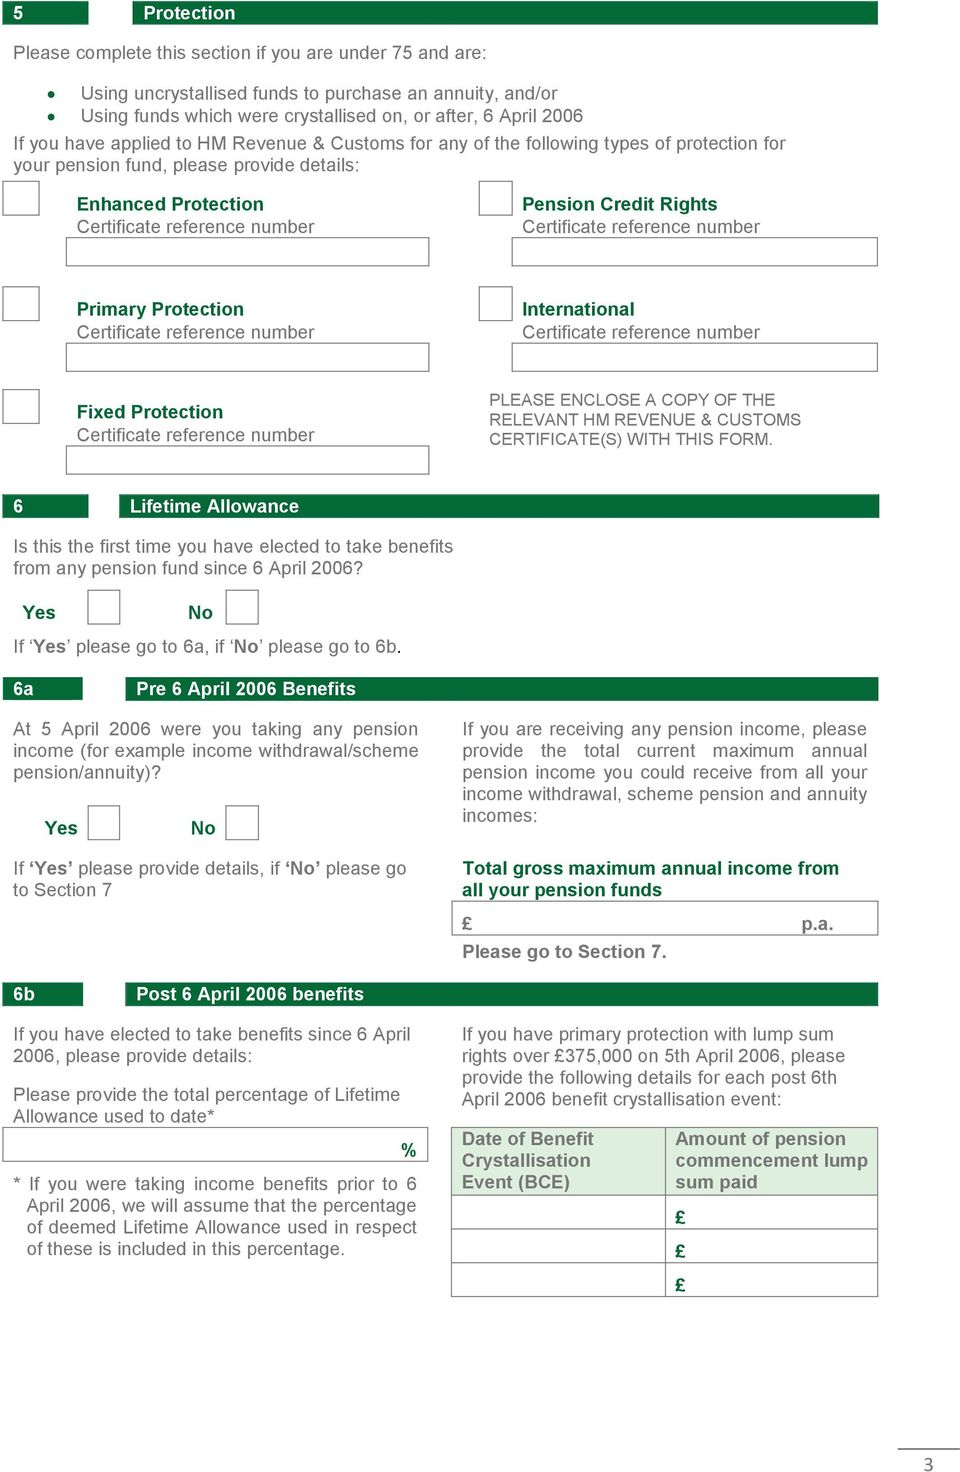 International Fixed Protection PLEASE ENCLOSE A COPY OF THE RELEVANT HM REVENUE & CUSTOMS CERTIFICATE(S) WITH THIS FORM.